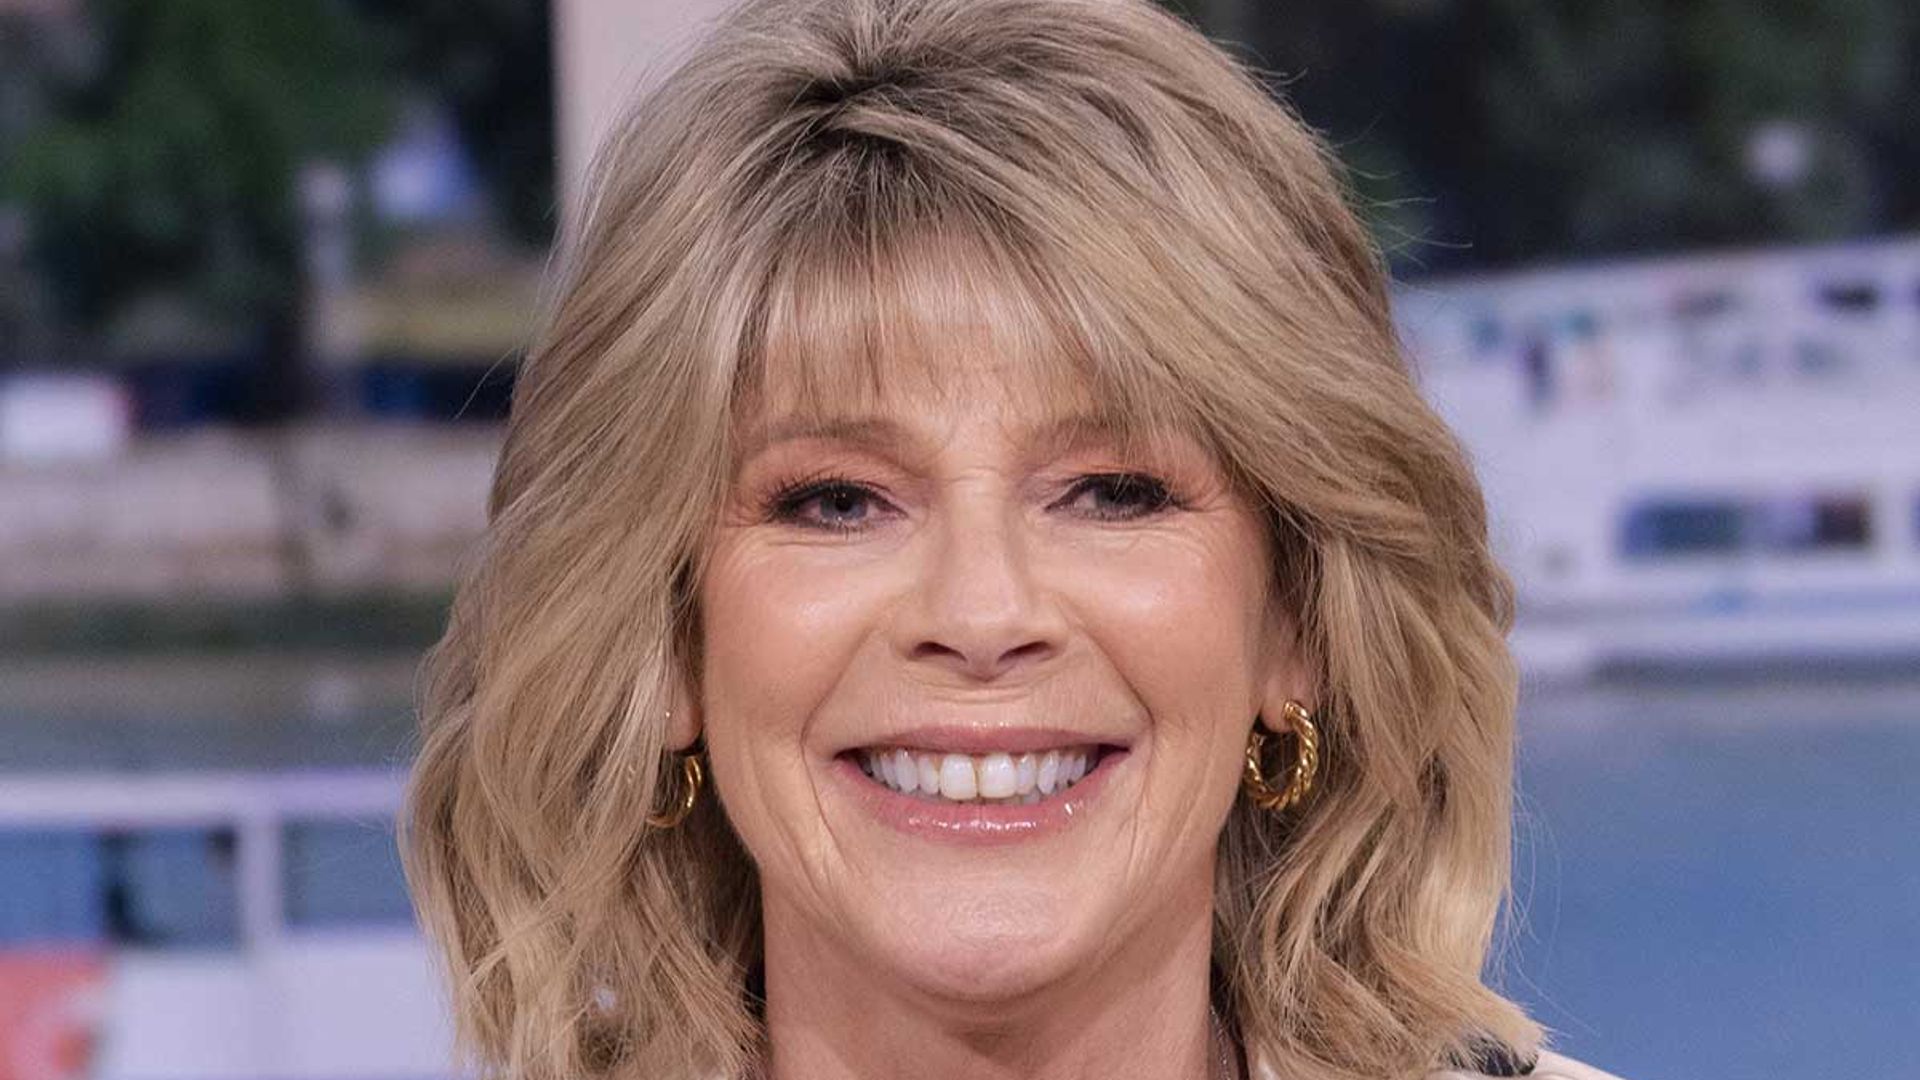 Ruth Langsford wows in silky power look - and we're obsessed